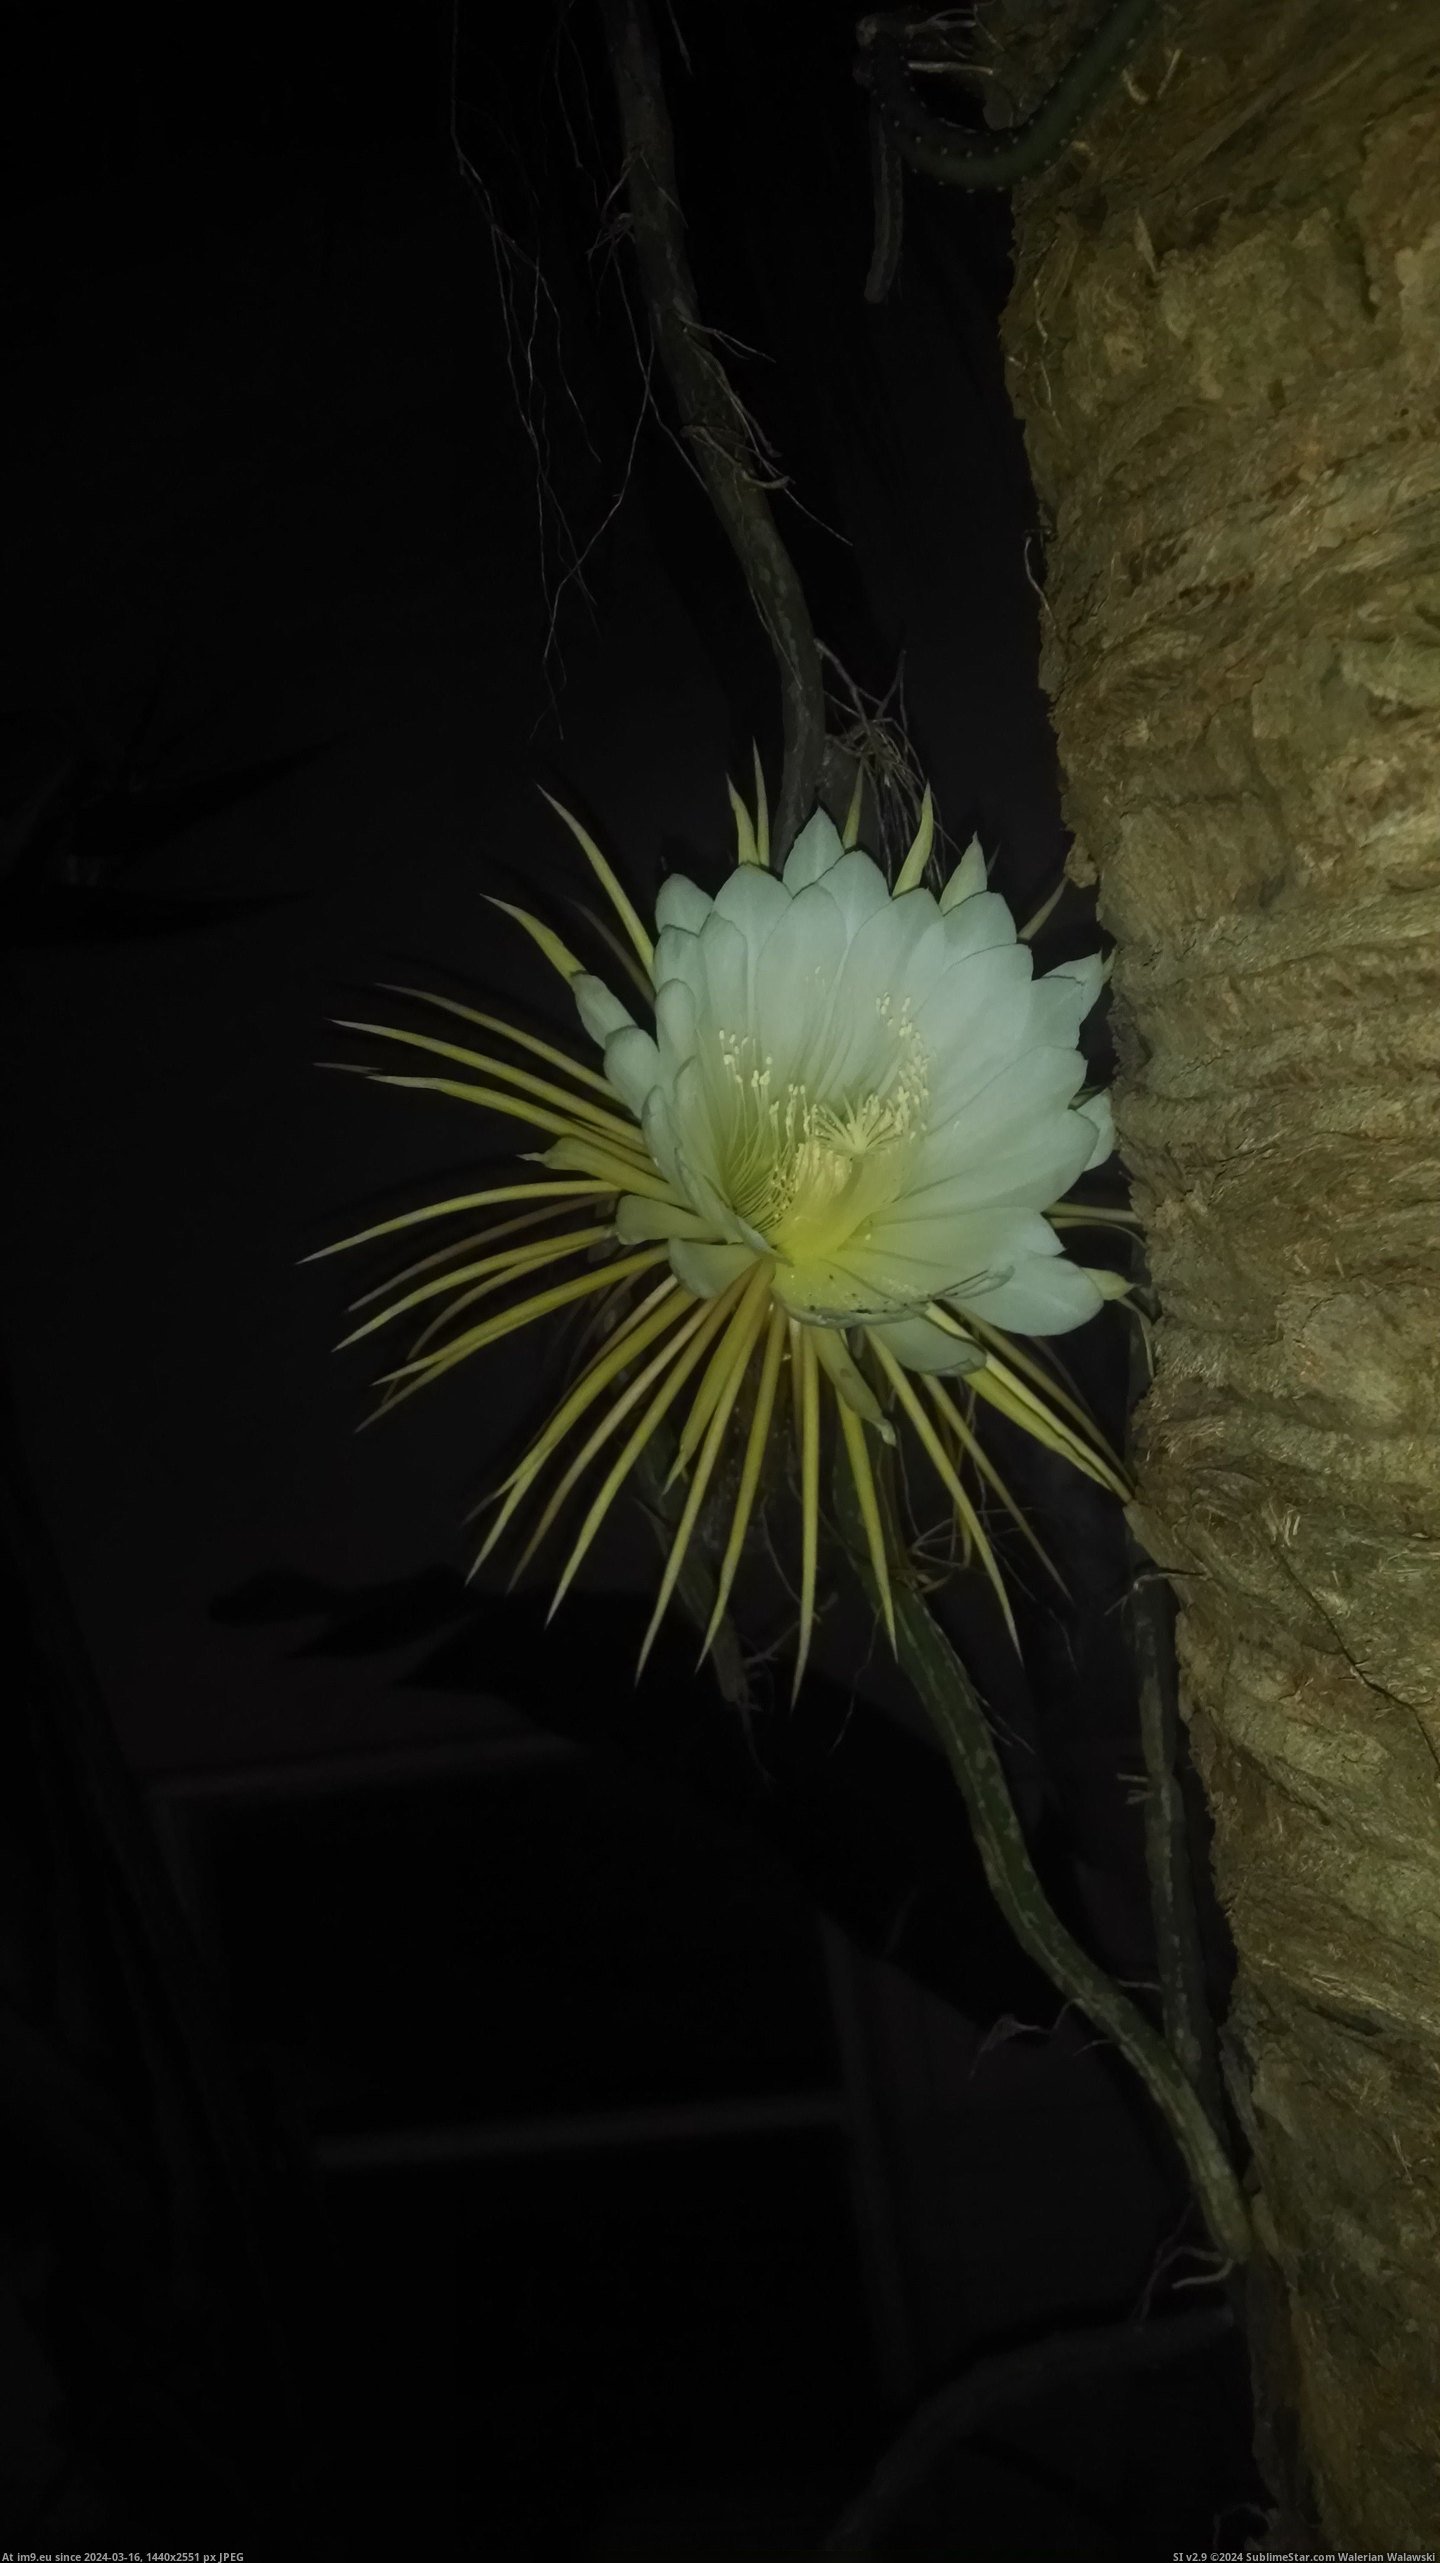 #Night #Tree #Front #Palm #Cactus #Hangs #Bloomed #Saw #Yard #Walked [Pics] I have a cactus that hangs from a palm tree in my front yard. Last night I walked outside and saw it had bloomed. Only ha Pic. (Bild von album My r/PICS favs))